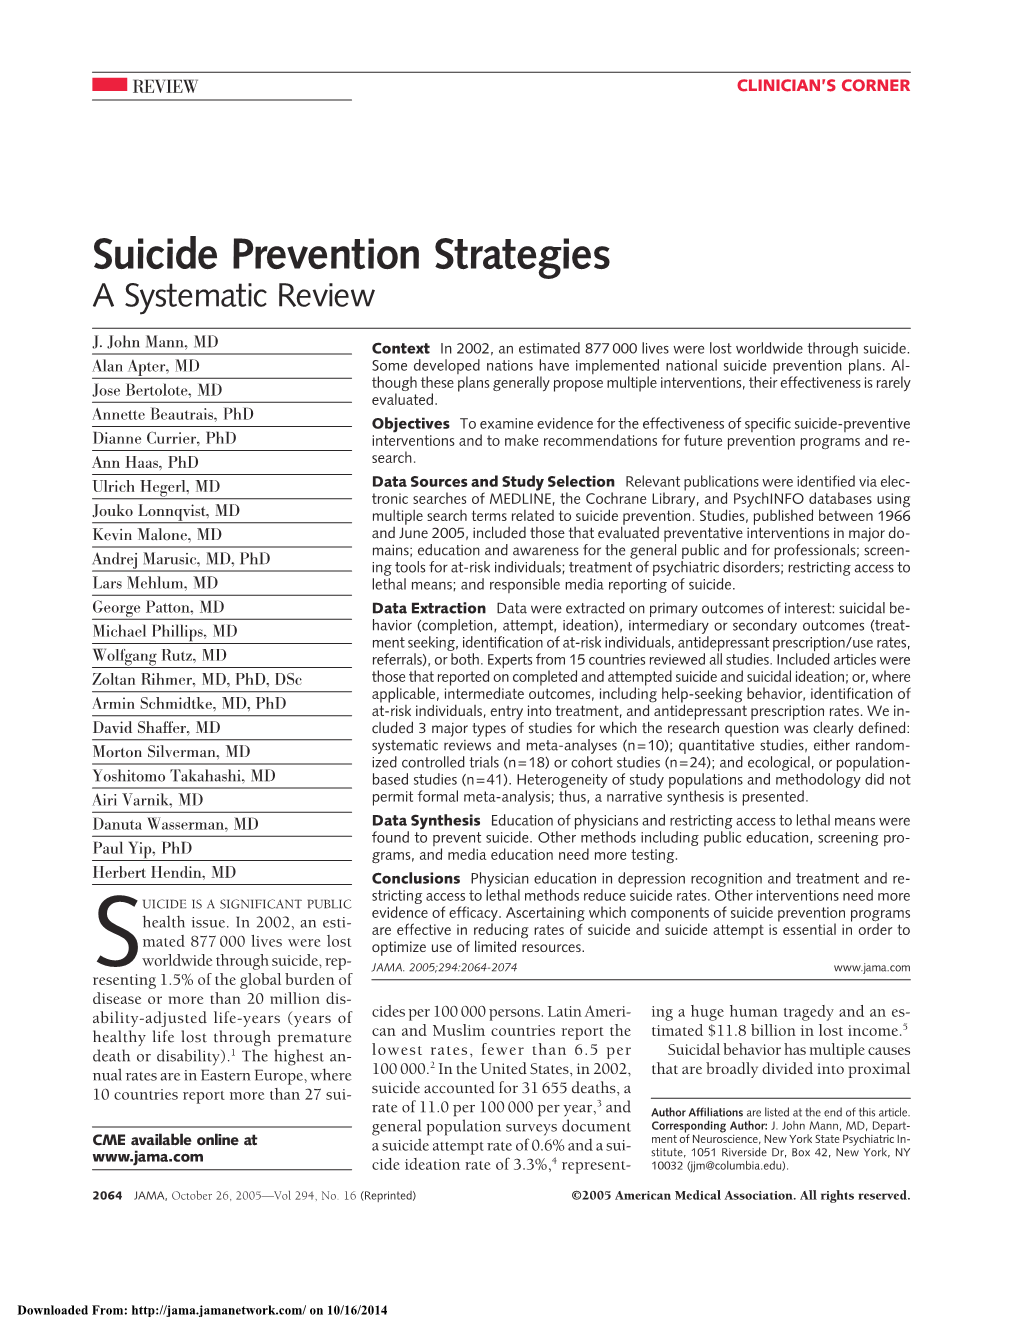 Suicide Prevention Systematic Review 2005